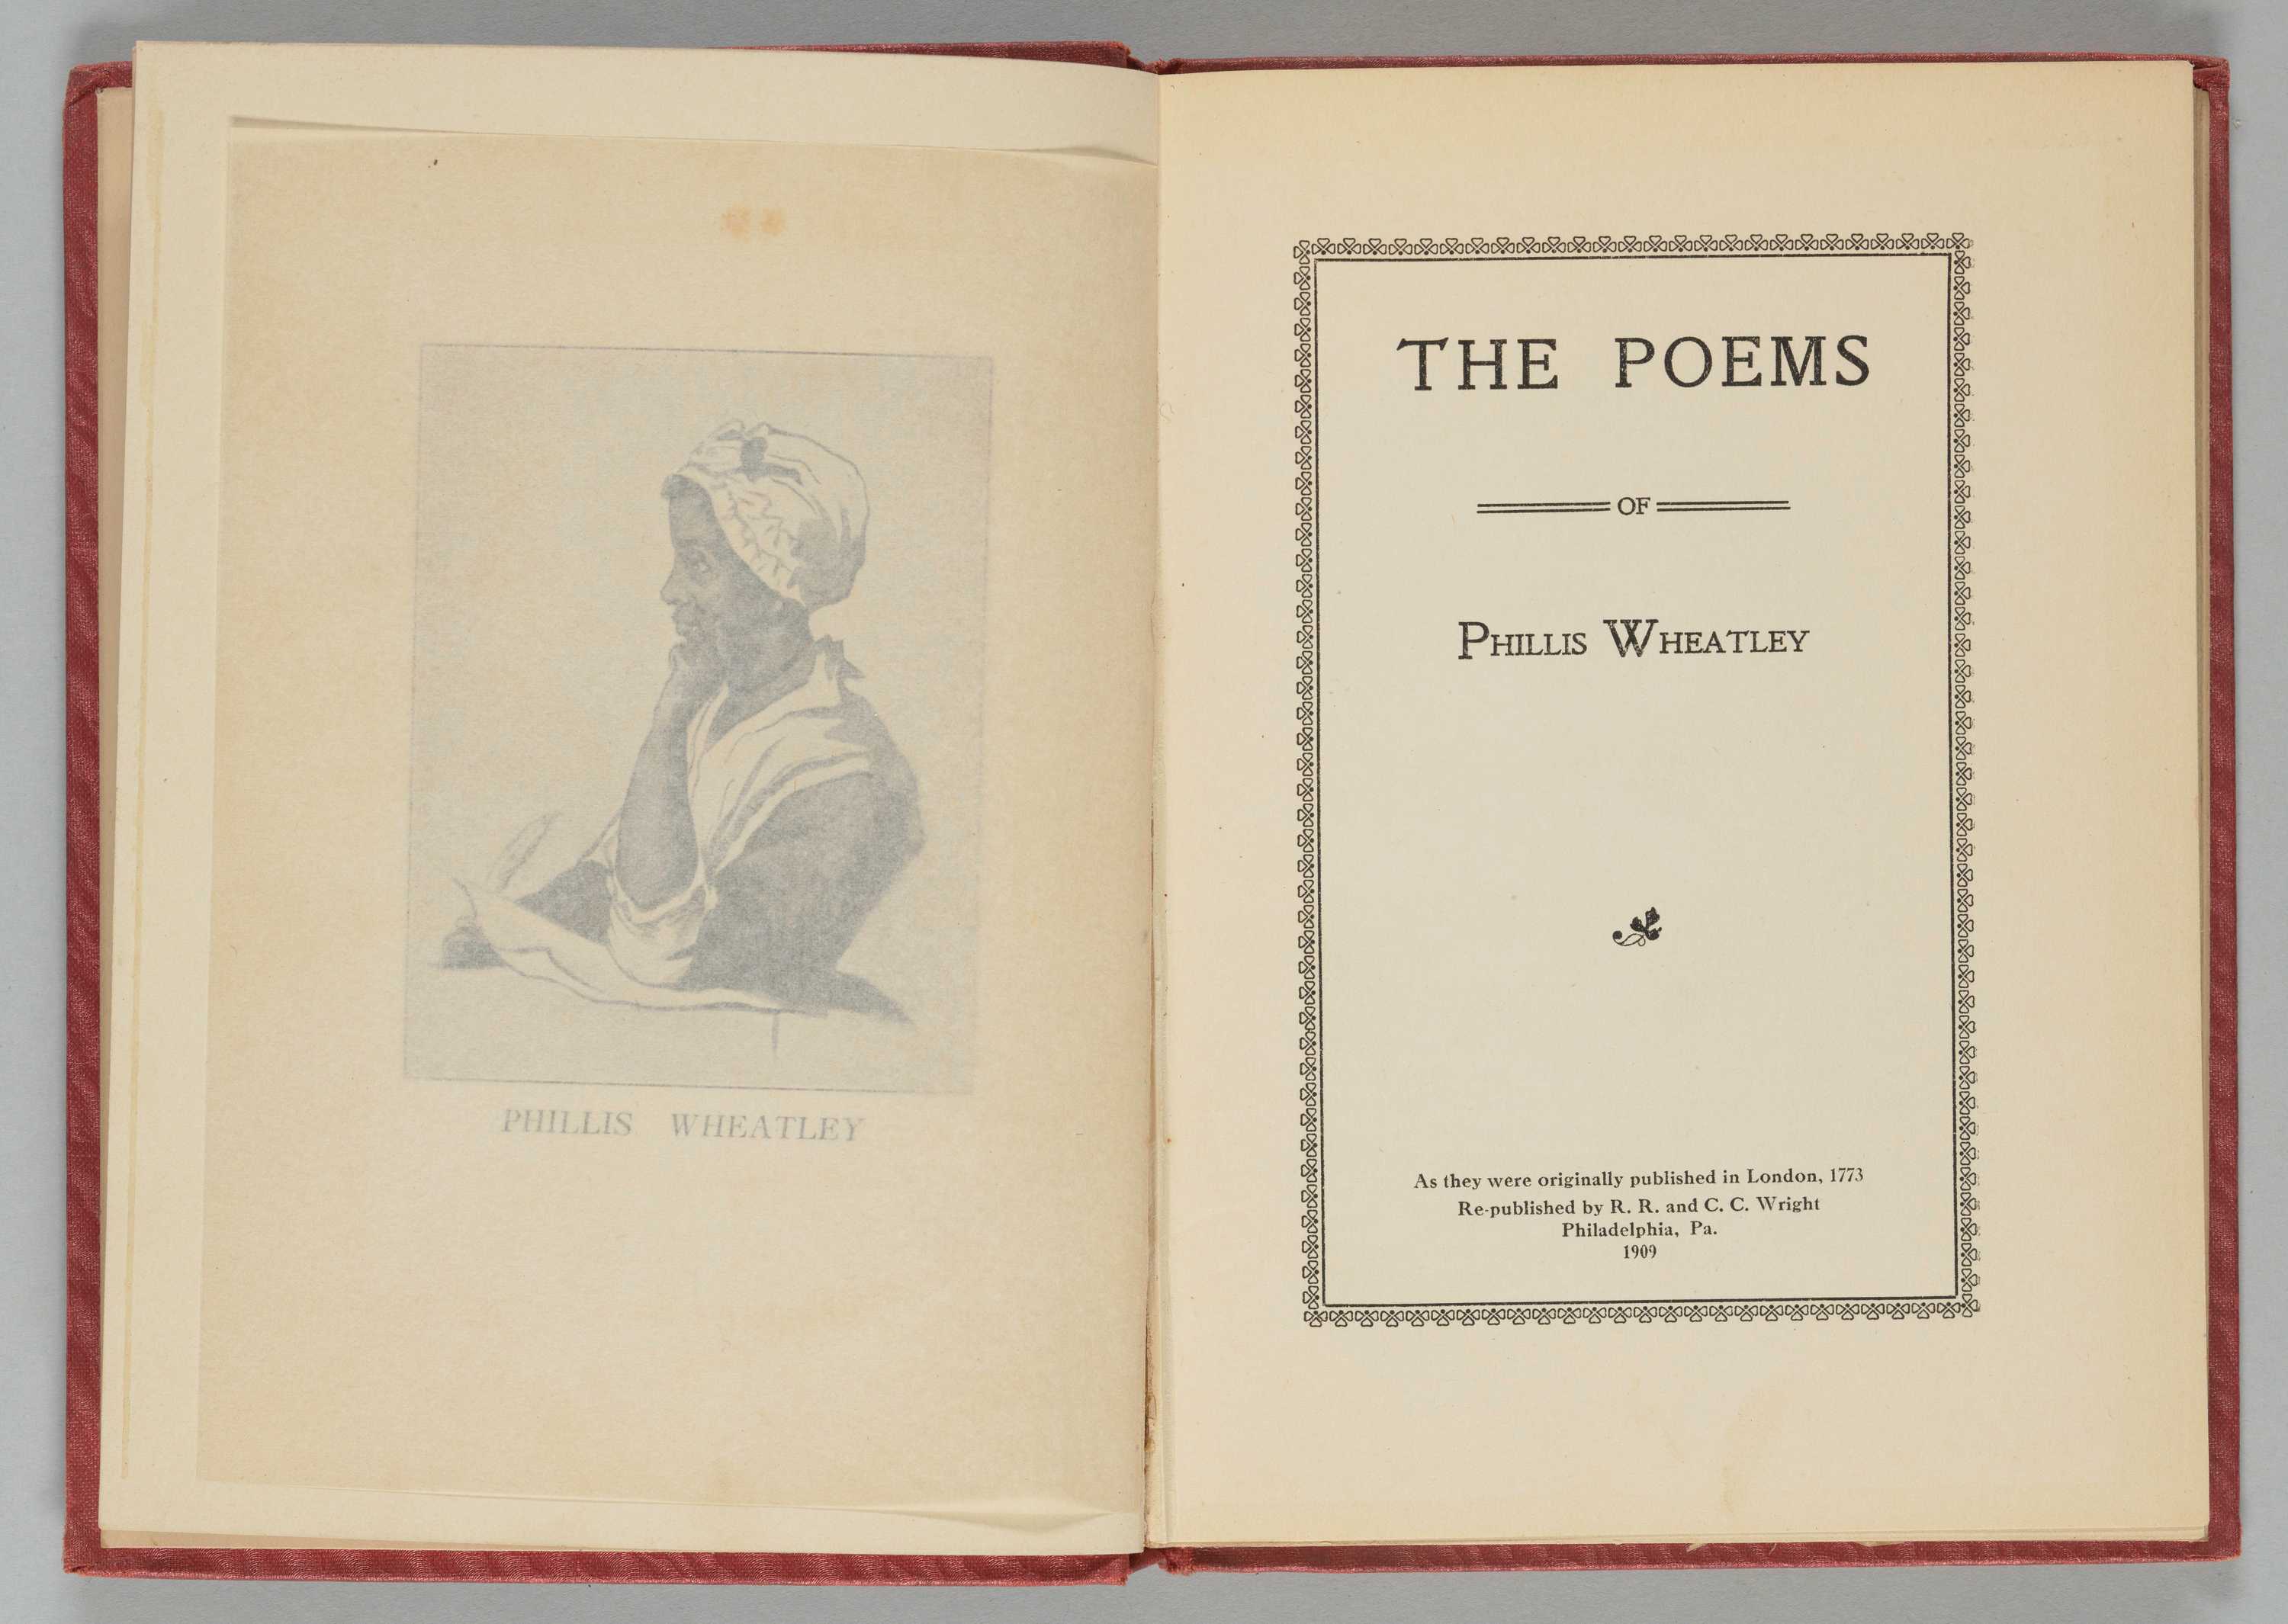 Inside cover of the A.M.E. Book Concern including an illustration of Phillis Wheatley and title page which reads "The Poems"